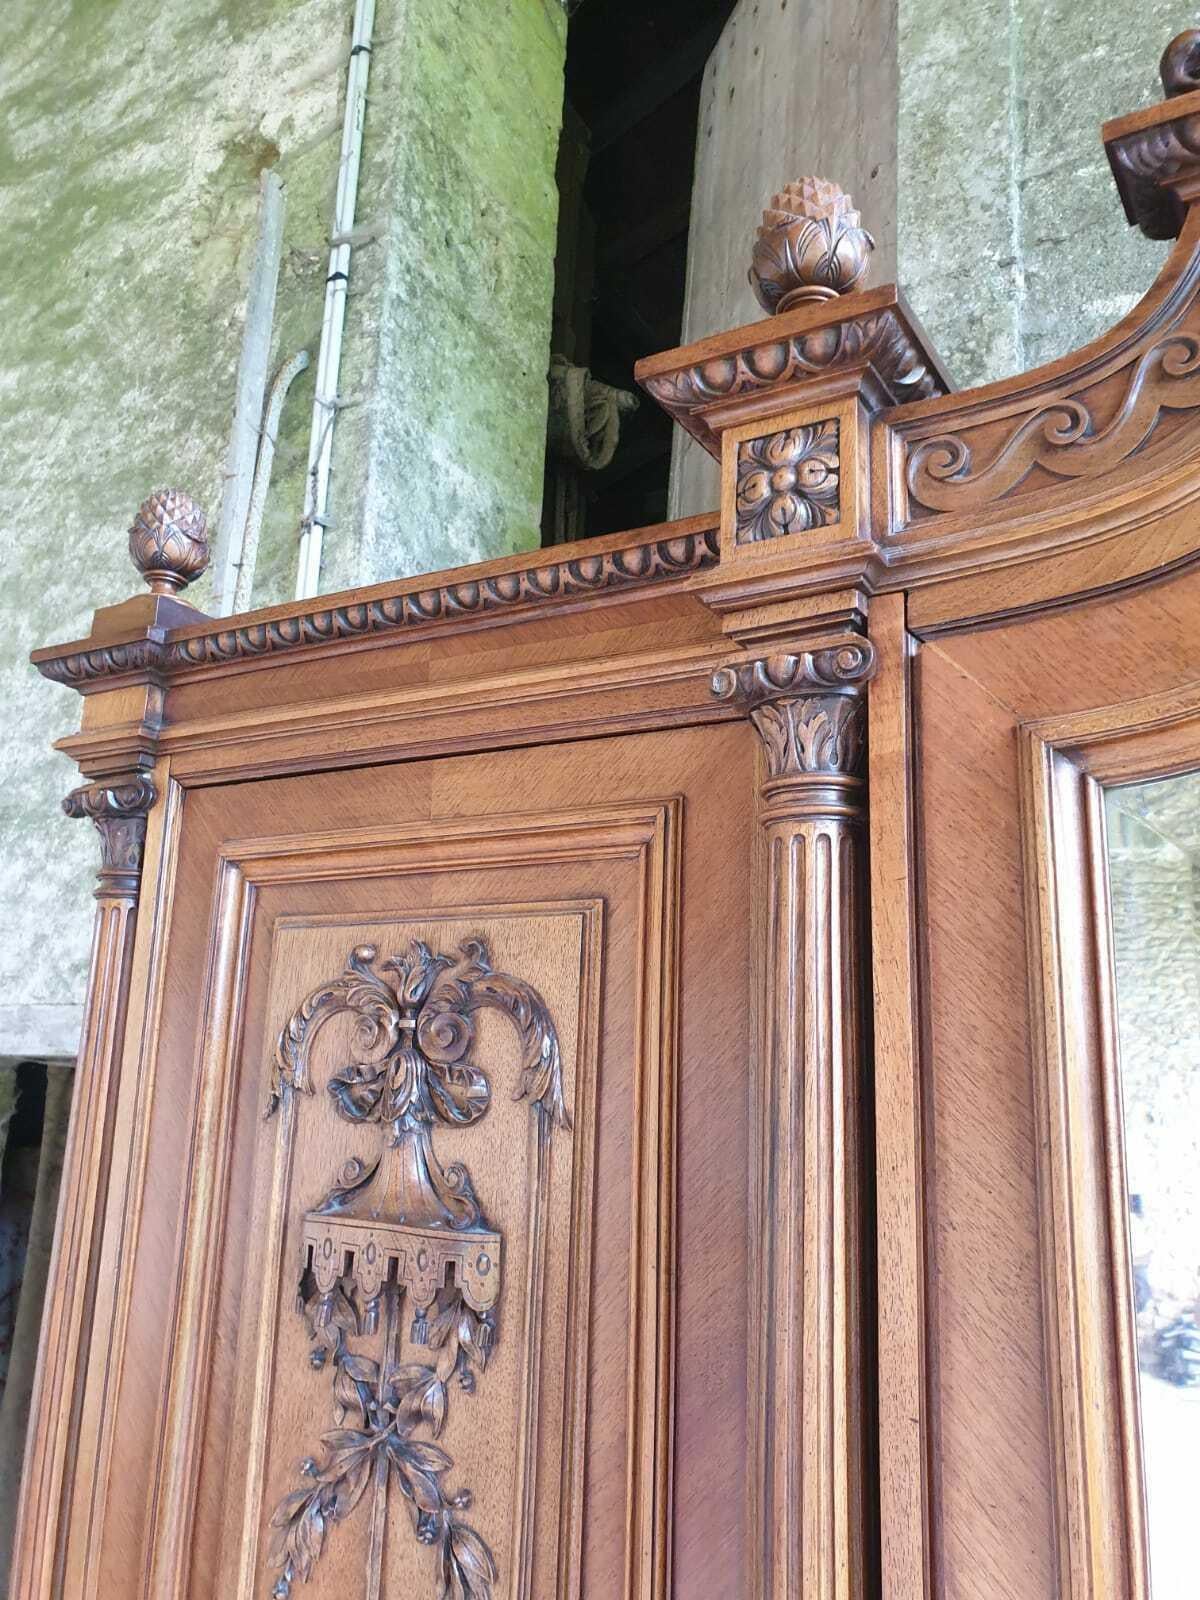 This is an Exceptional Louis XVI revival armoire, carved from a high quality Walnut.
The Wardrobe has a Beautiful Central Crest, Carved with Floral Bouquets 
 and Ribbons. The Elegant armoire has Acorn Carved Finials that provide Provenance and